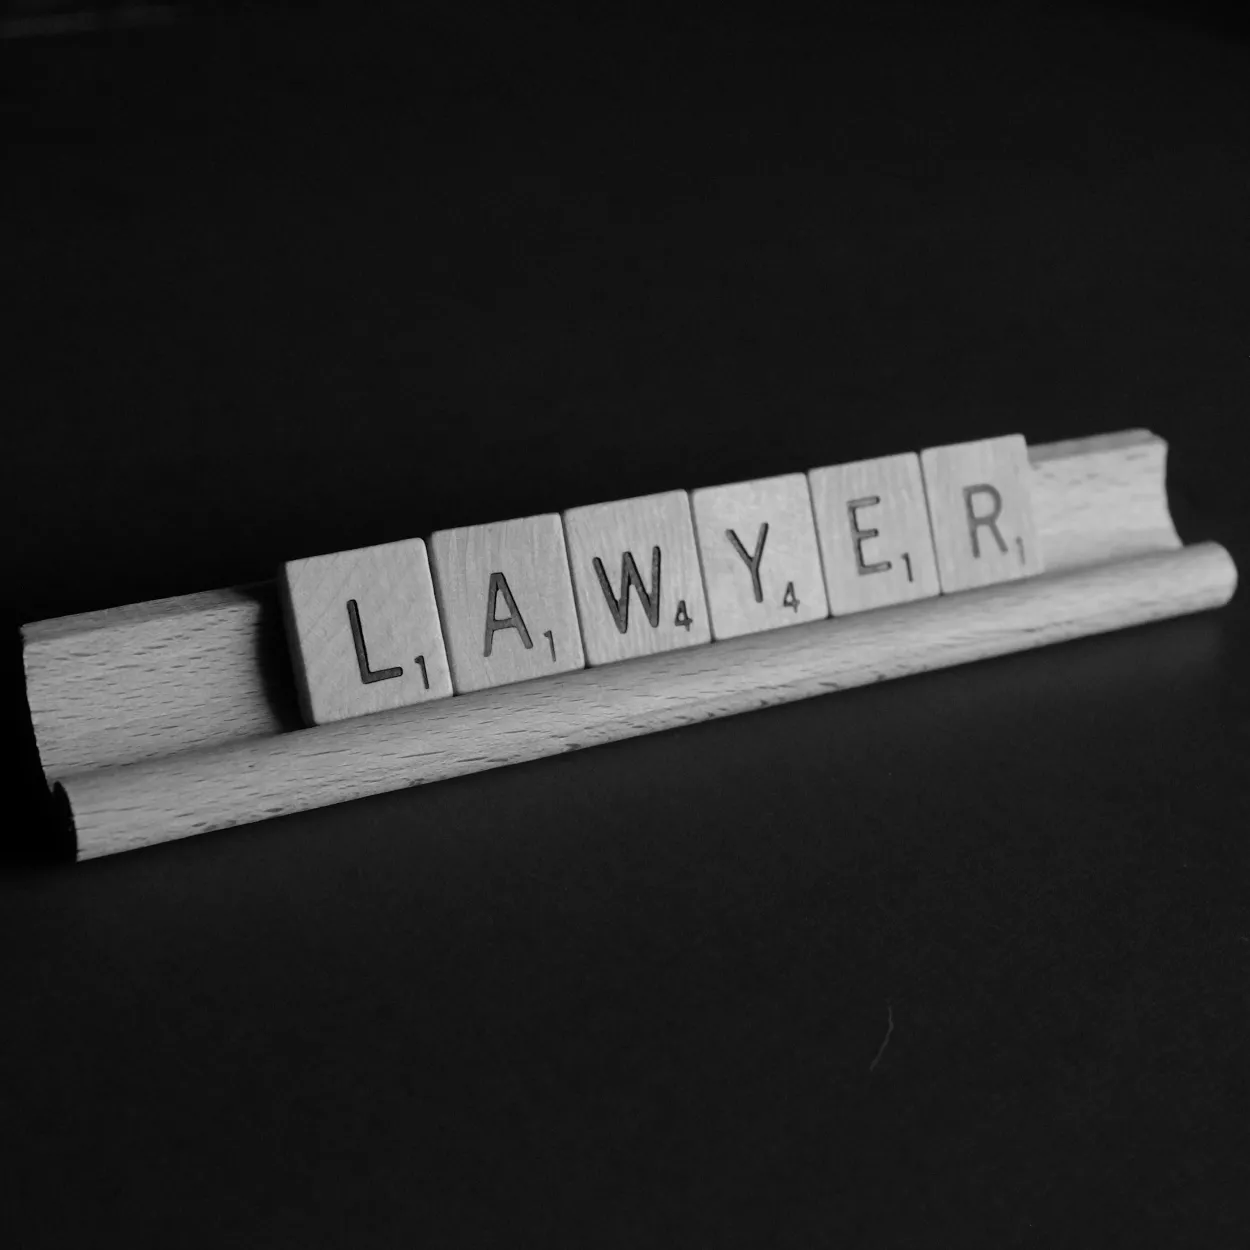 The word Lawyer sits on a Scrabble tile holder